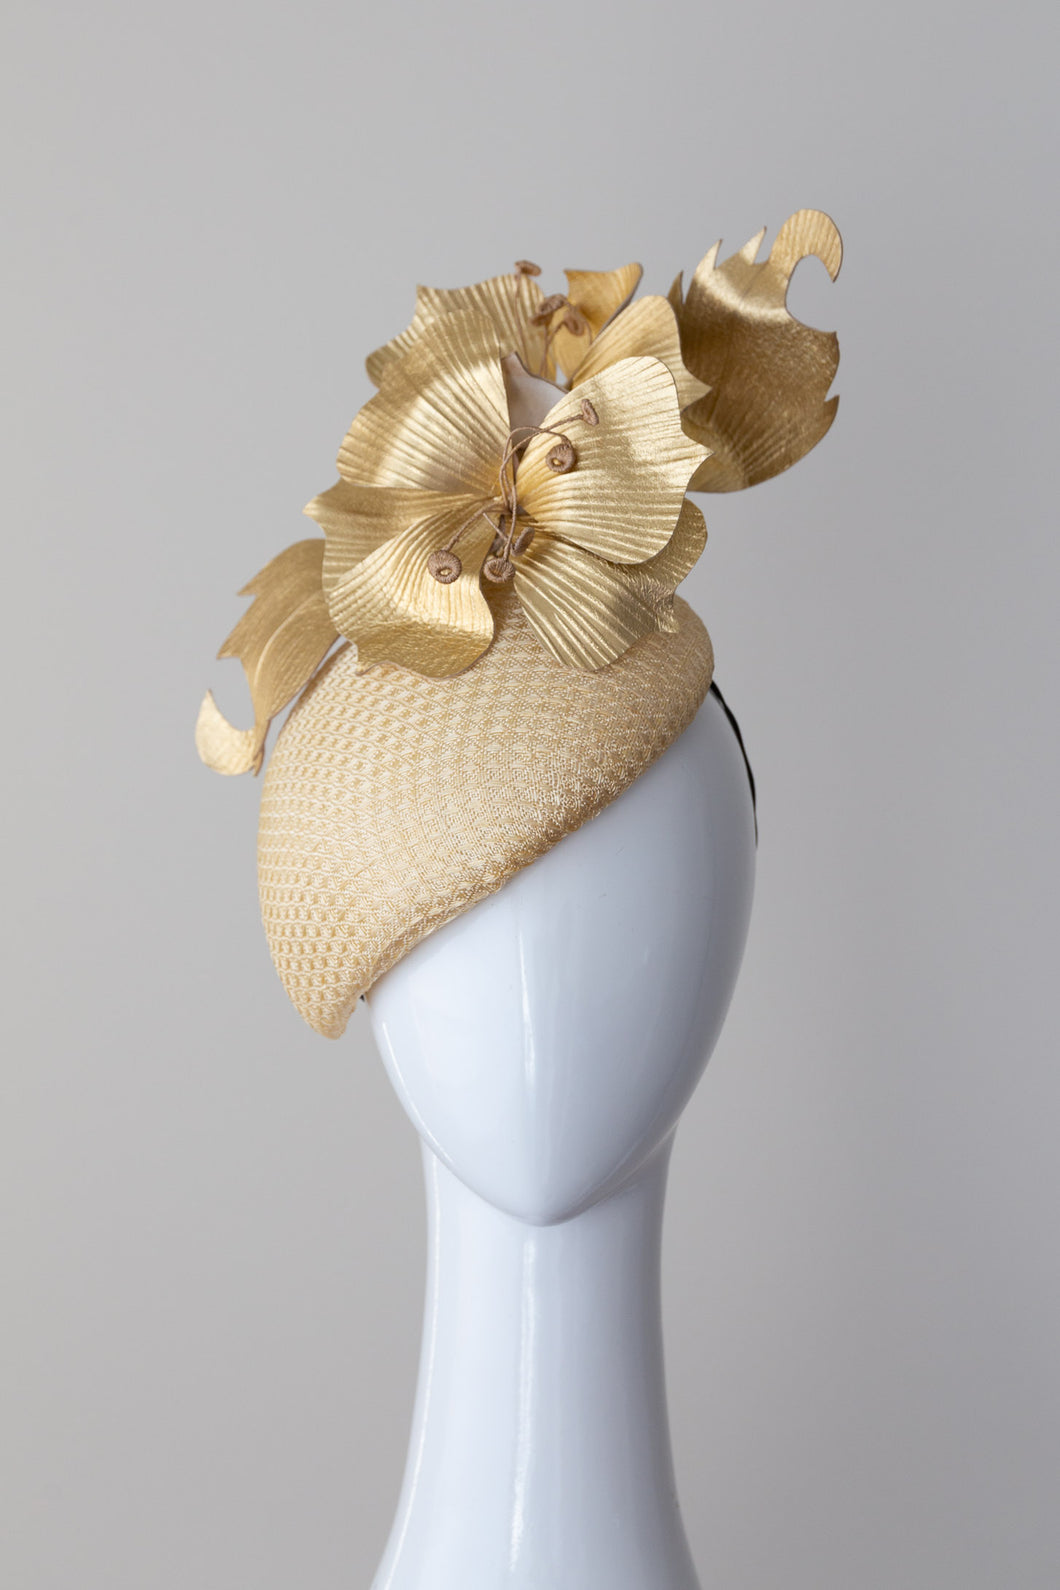 Gold Tear Drop Beret with Leather Flowers by Felicity Northeast Millinery